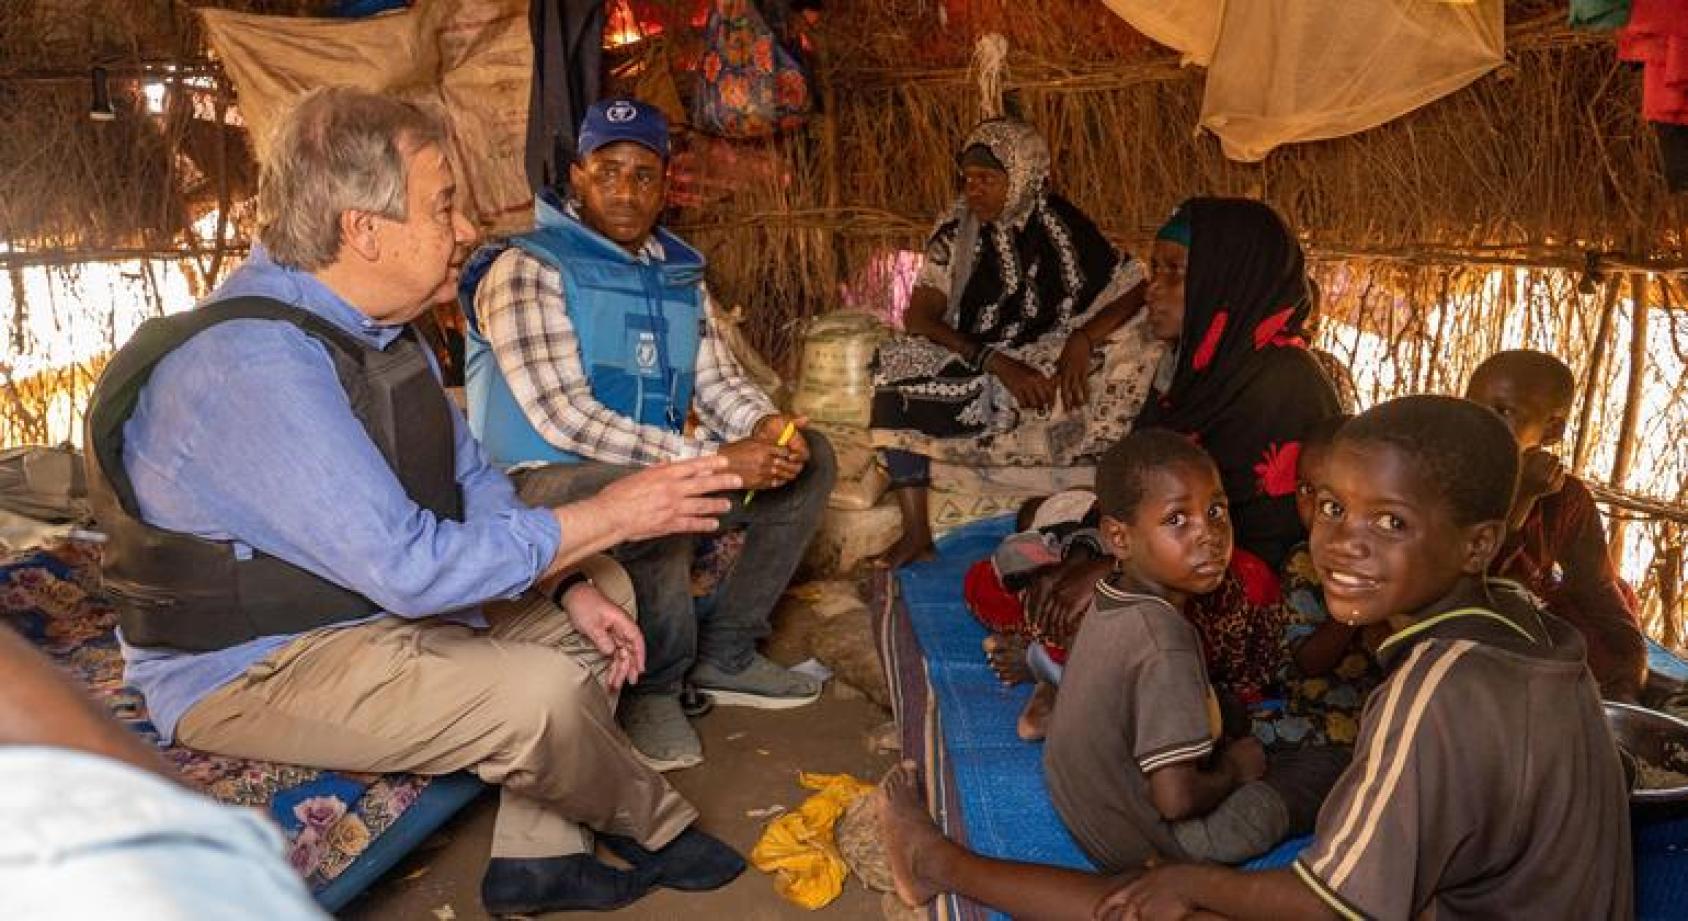 An official of the UN speaks to persons of concern in a tent.